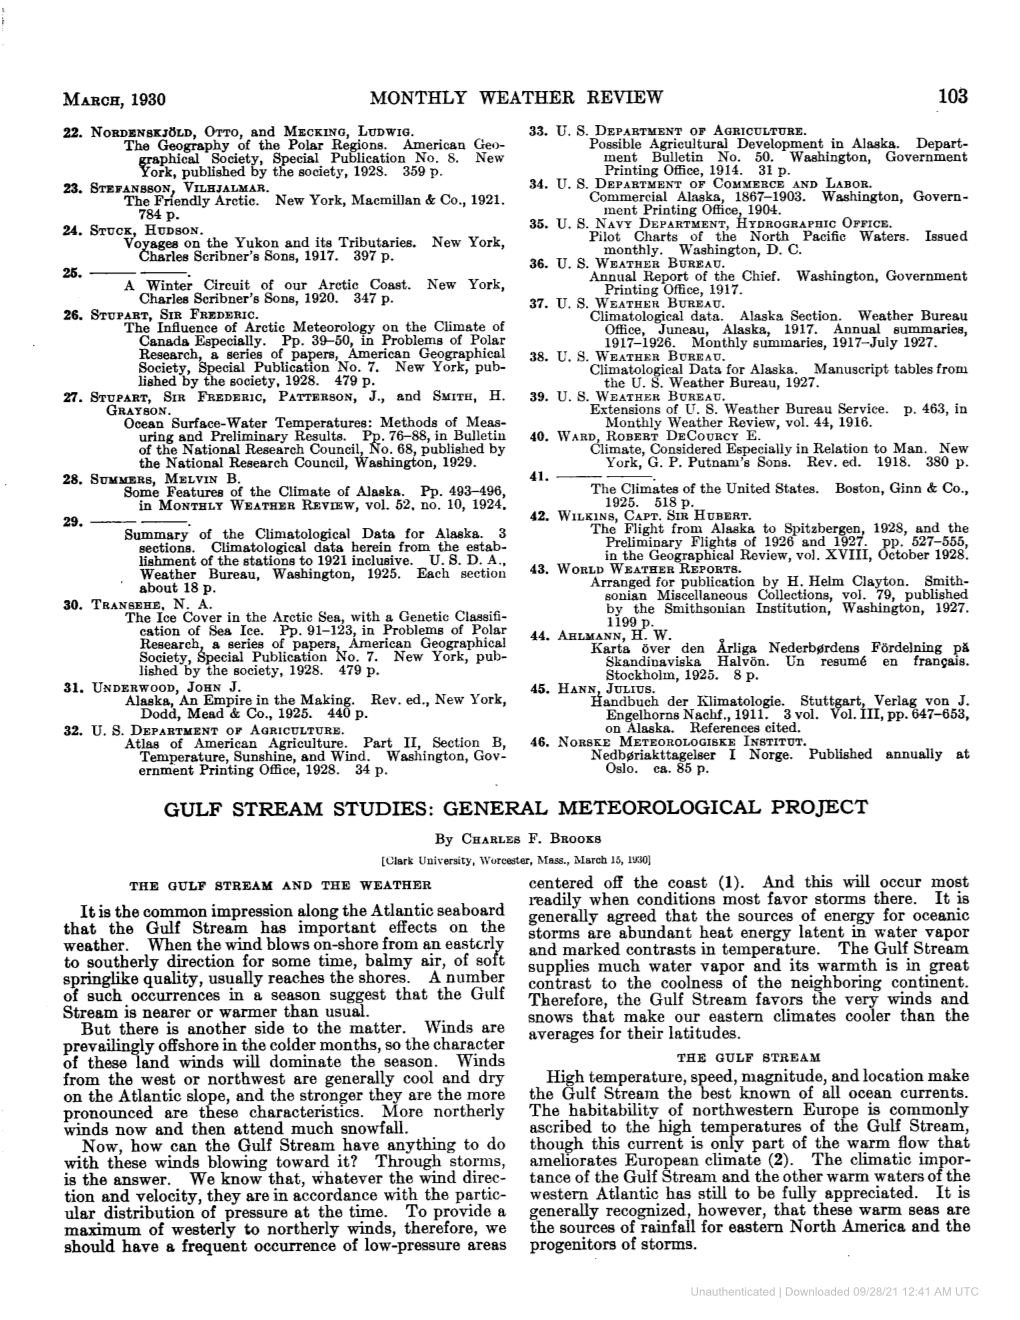 March, 1930 Monthly Weather Review Gulf Stream Studies